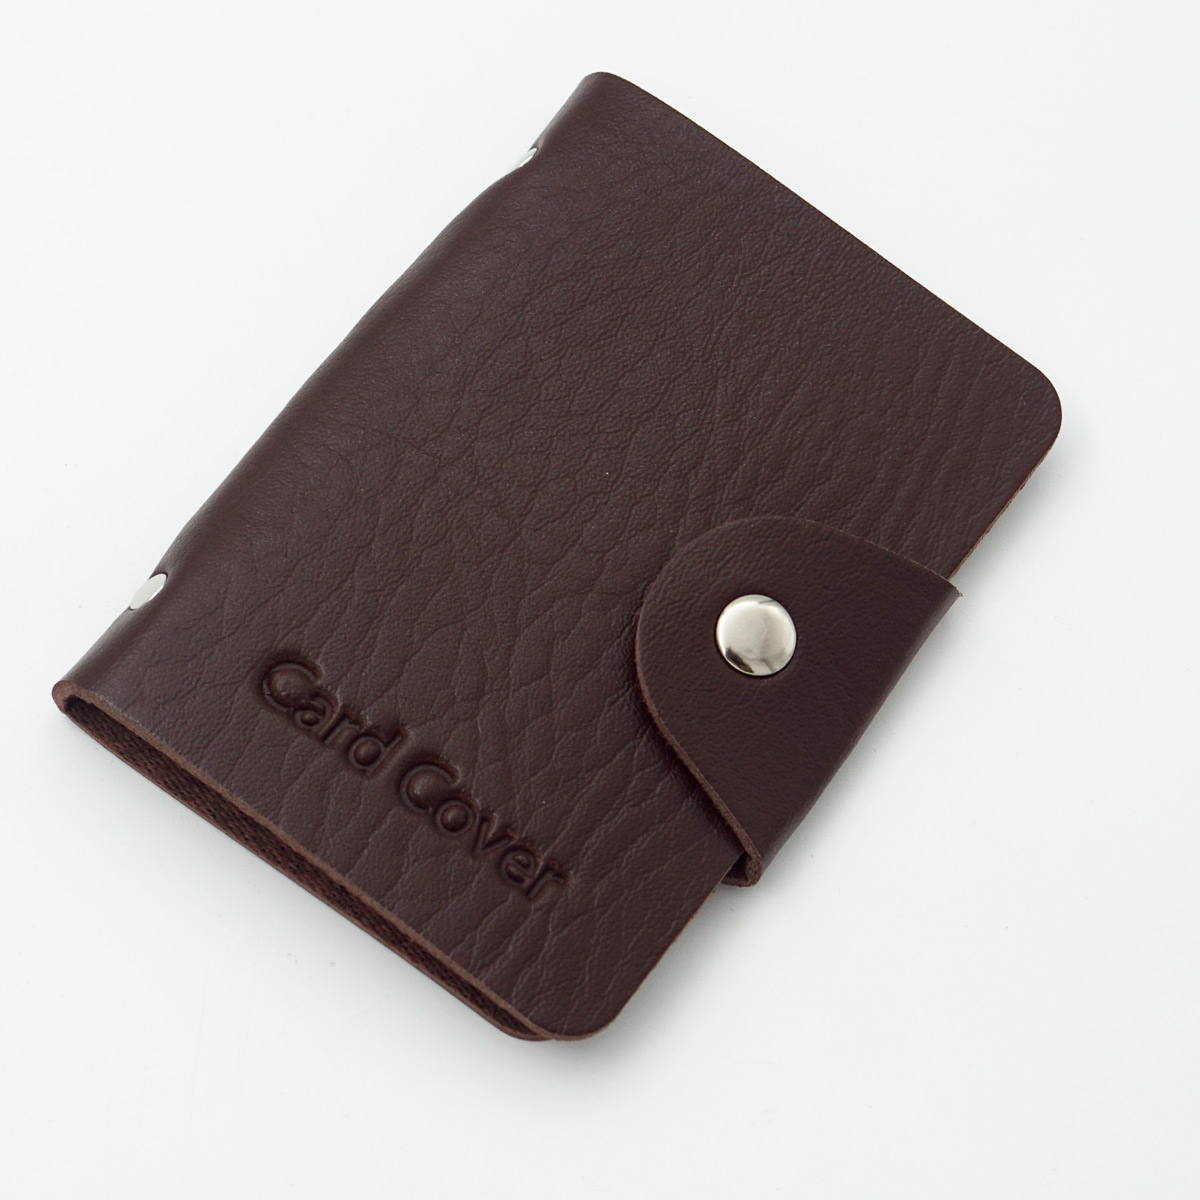 penhouse.in Brown Color Leather With Album Card Holder SKU 87210